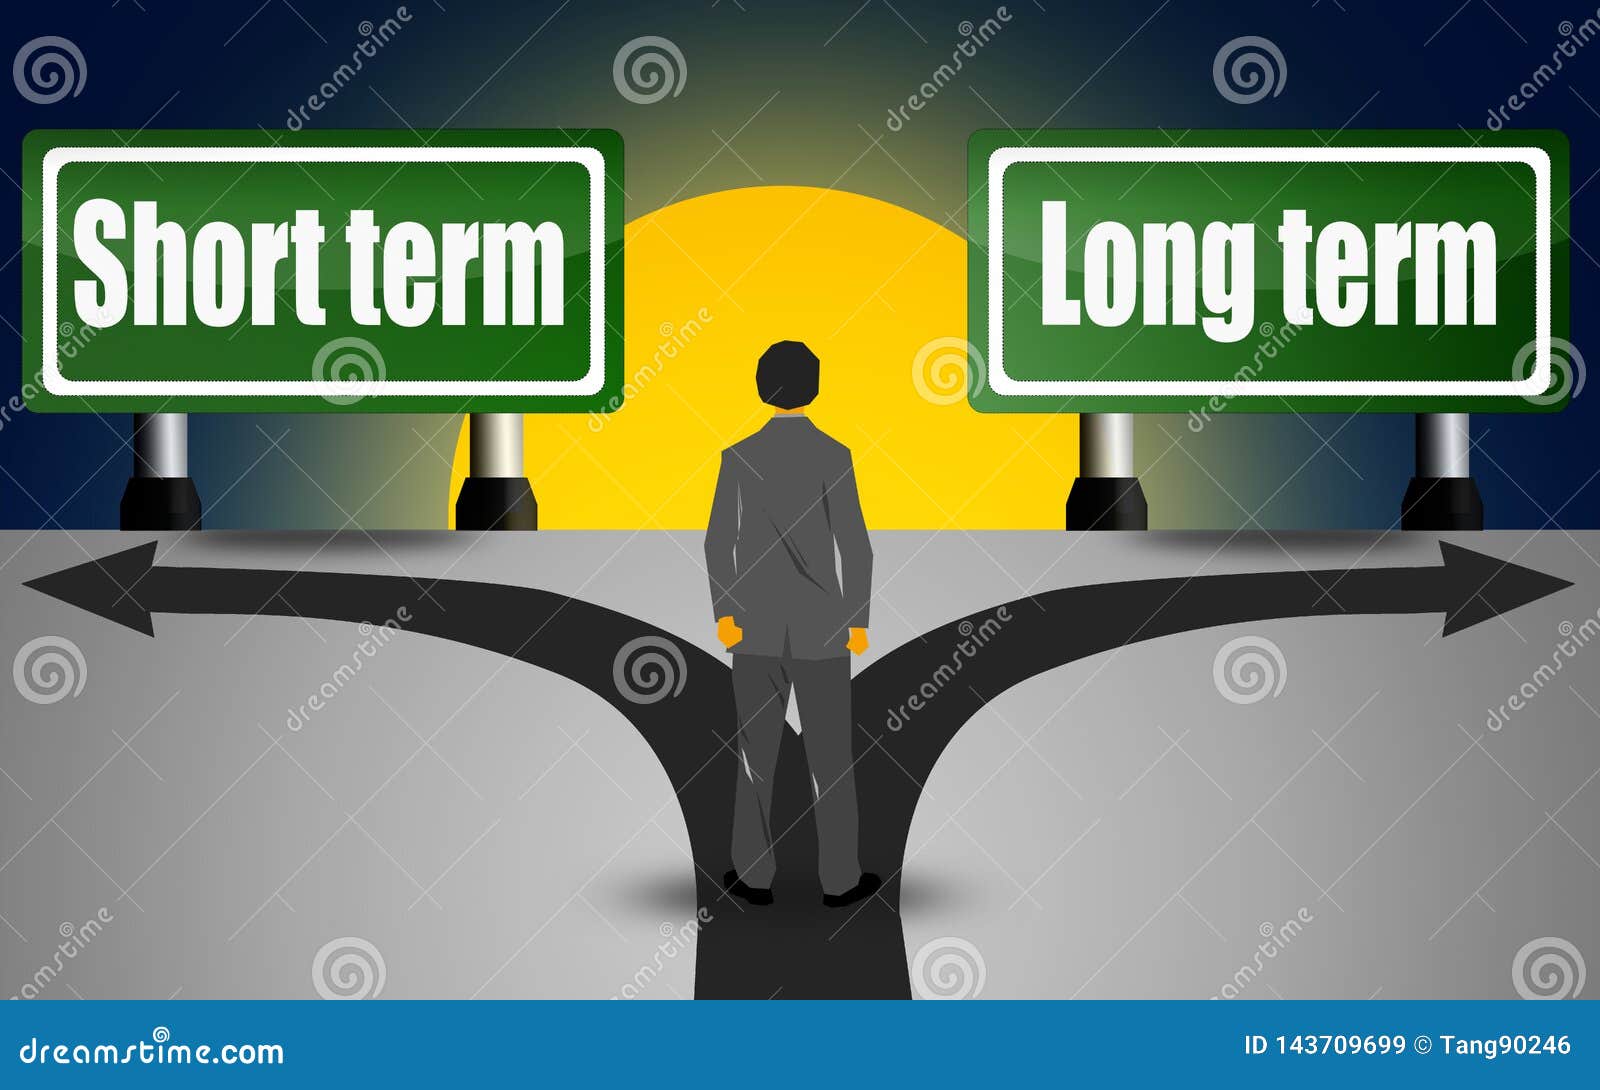 two green direction sign, short term and long term